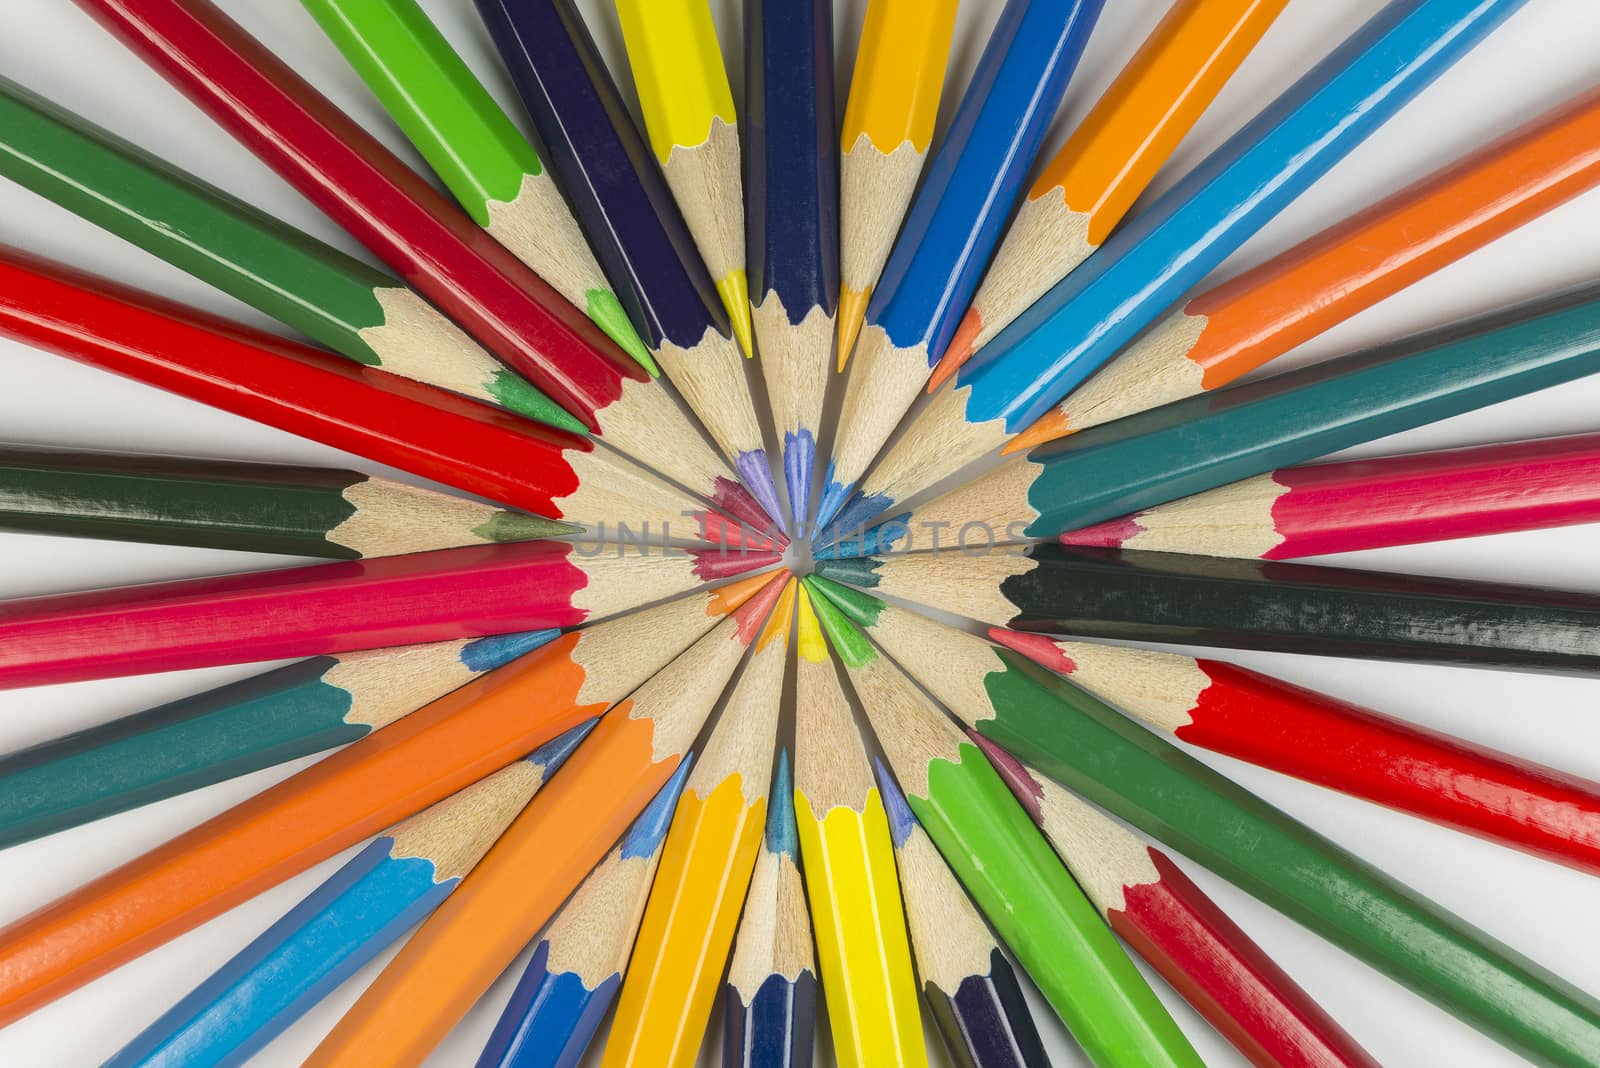 Color circle of pencils with complementary colors
 by Tofotografie